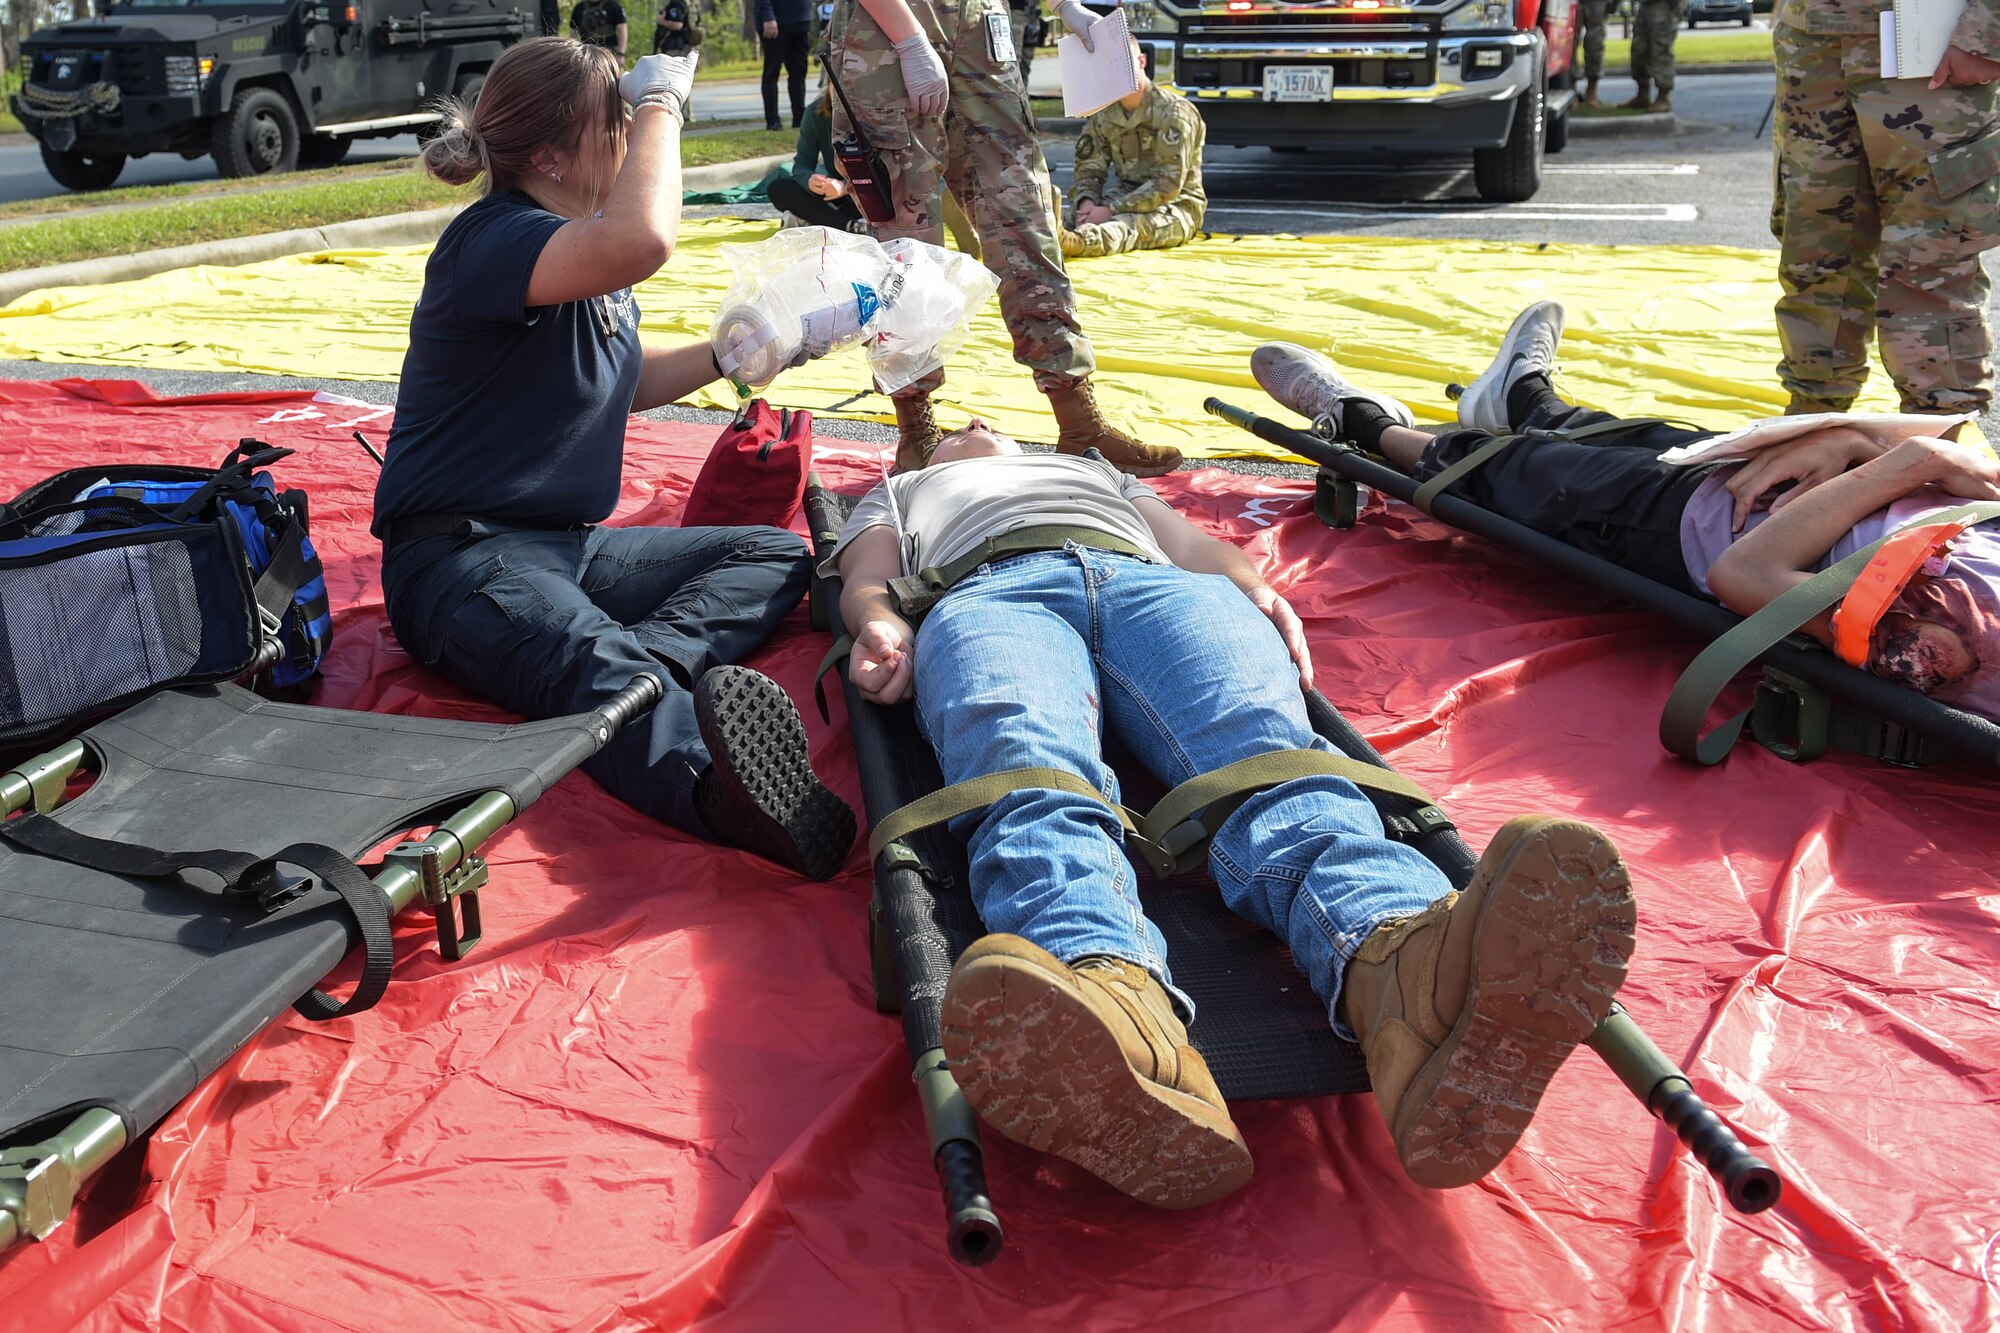 A photo of a woman helping "injured" participants.